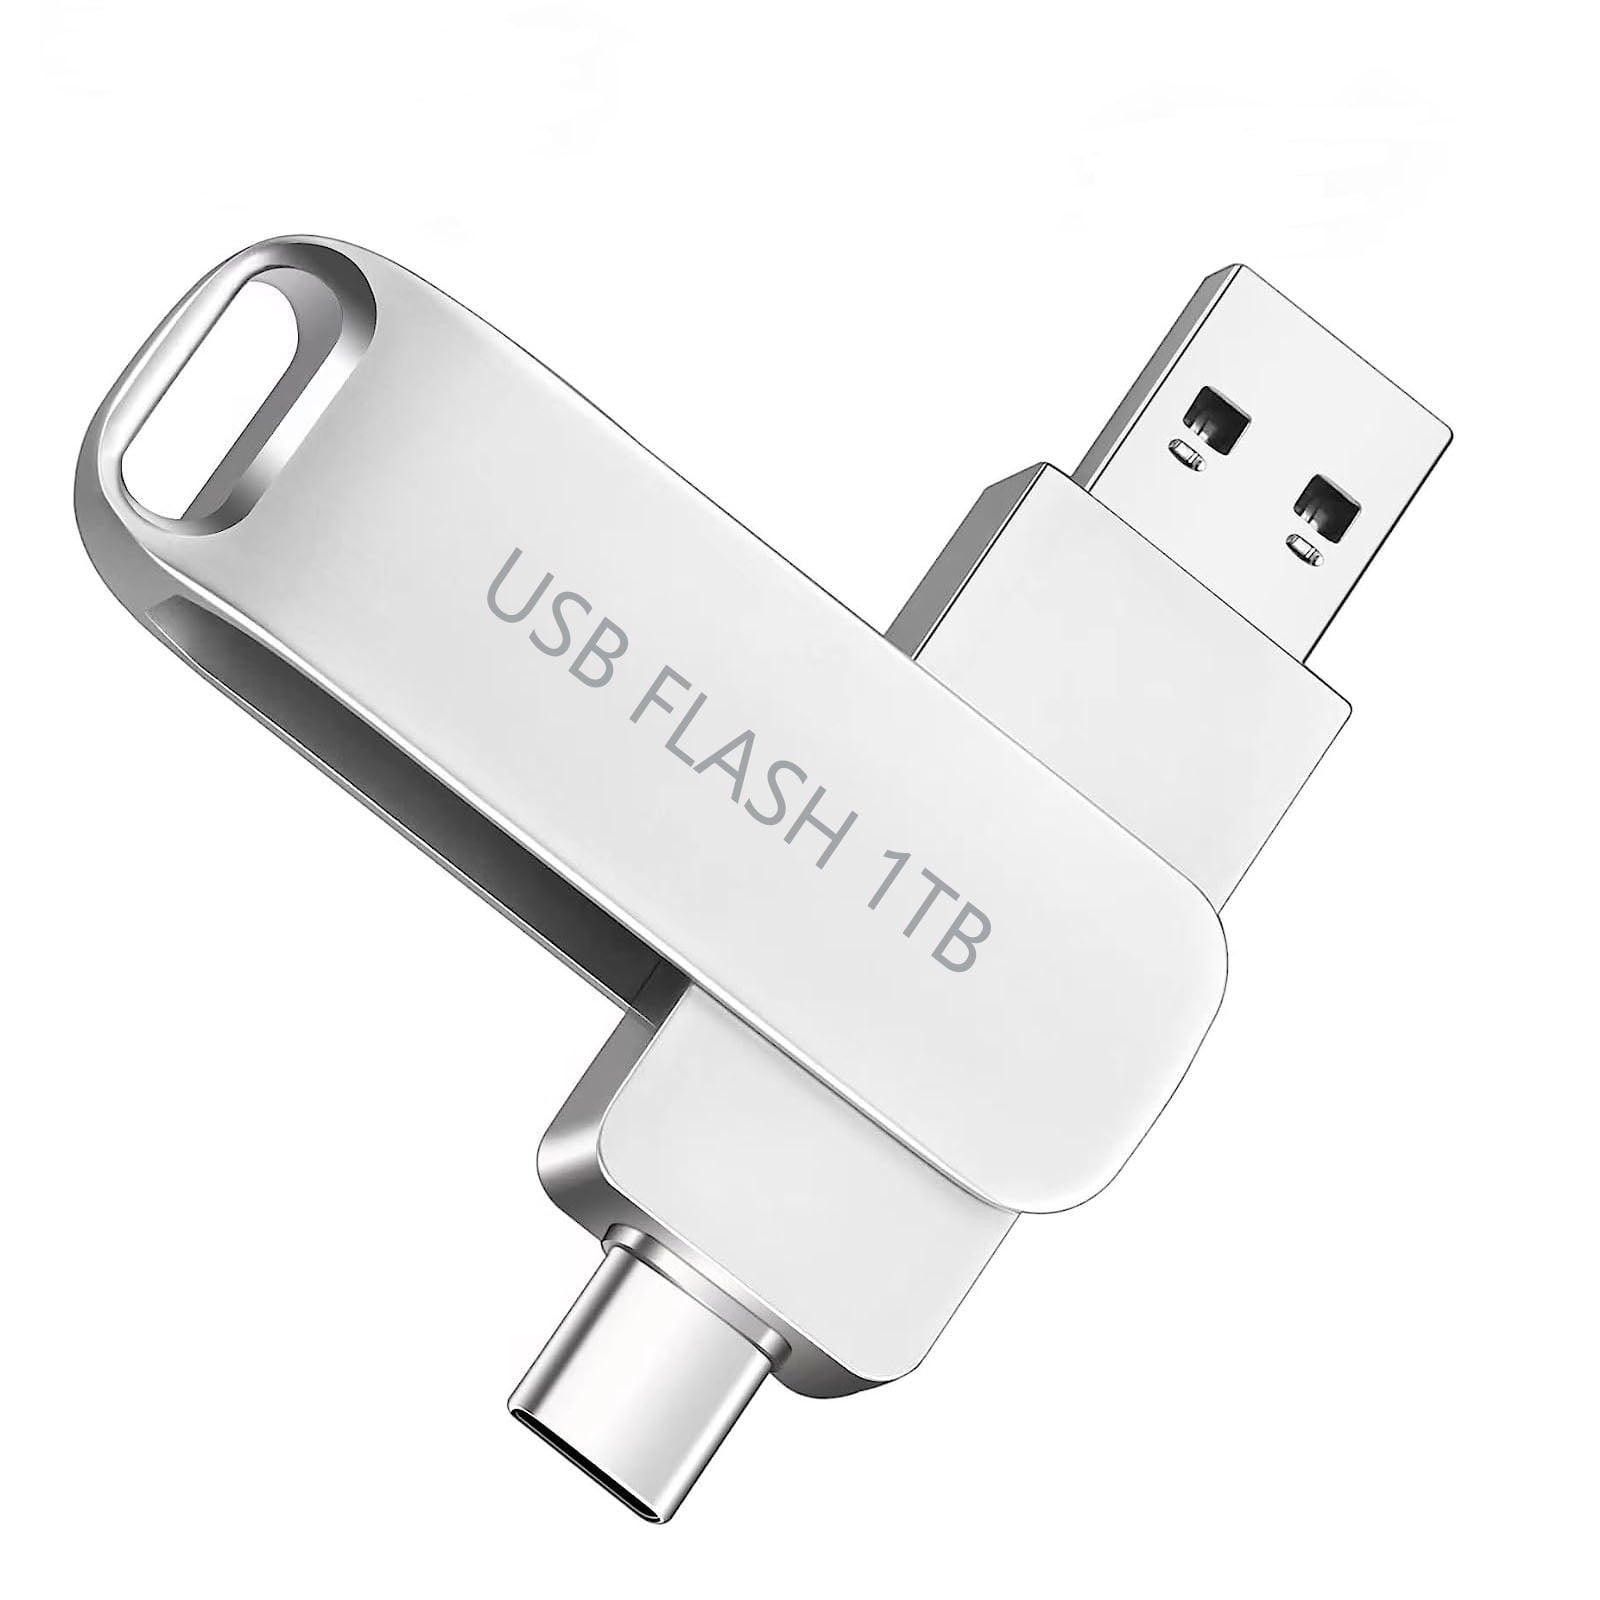 1TB USB Flash Drive-2 in 1 Thumb Drive with USB and Type C Port